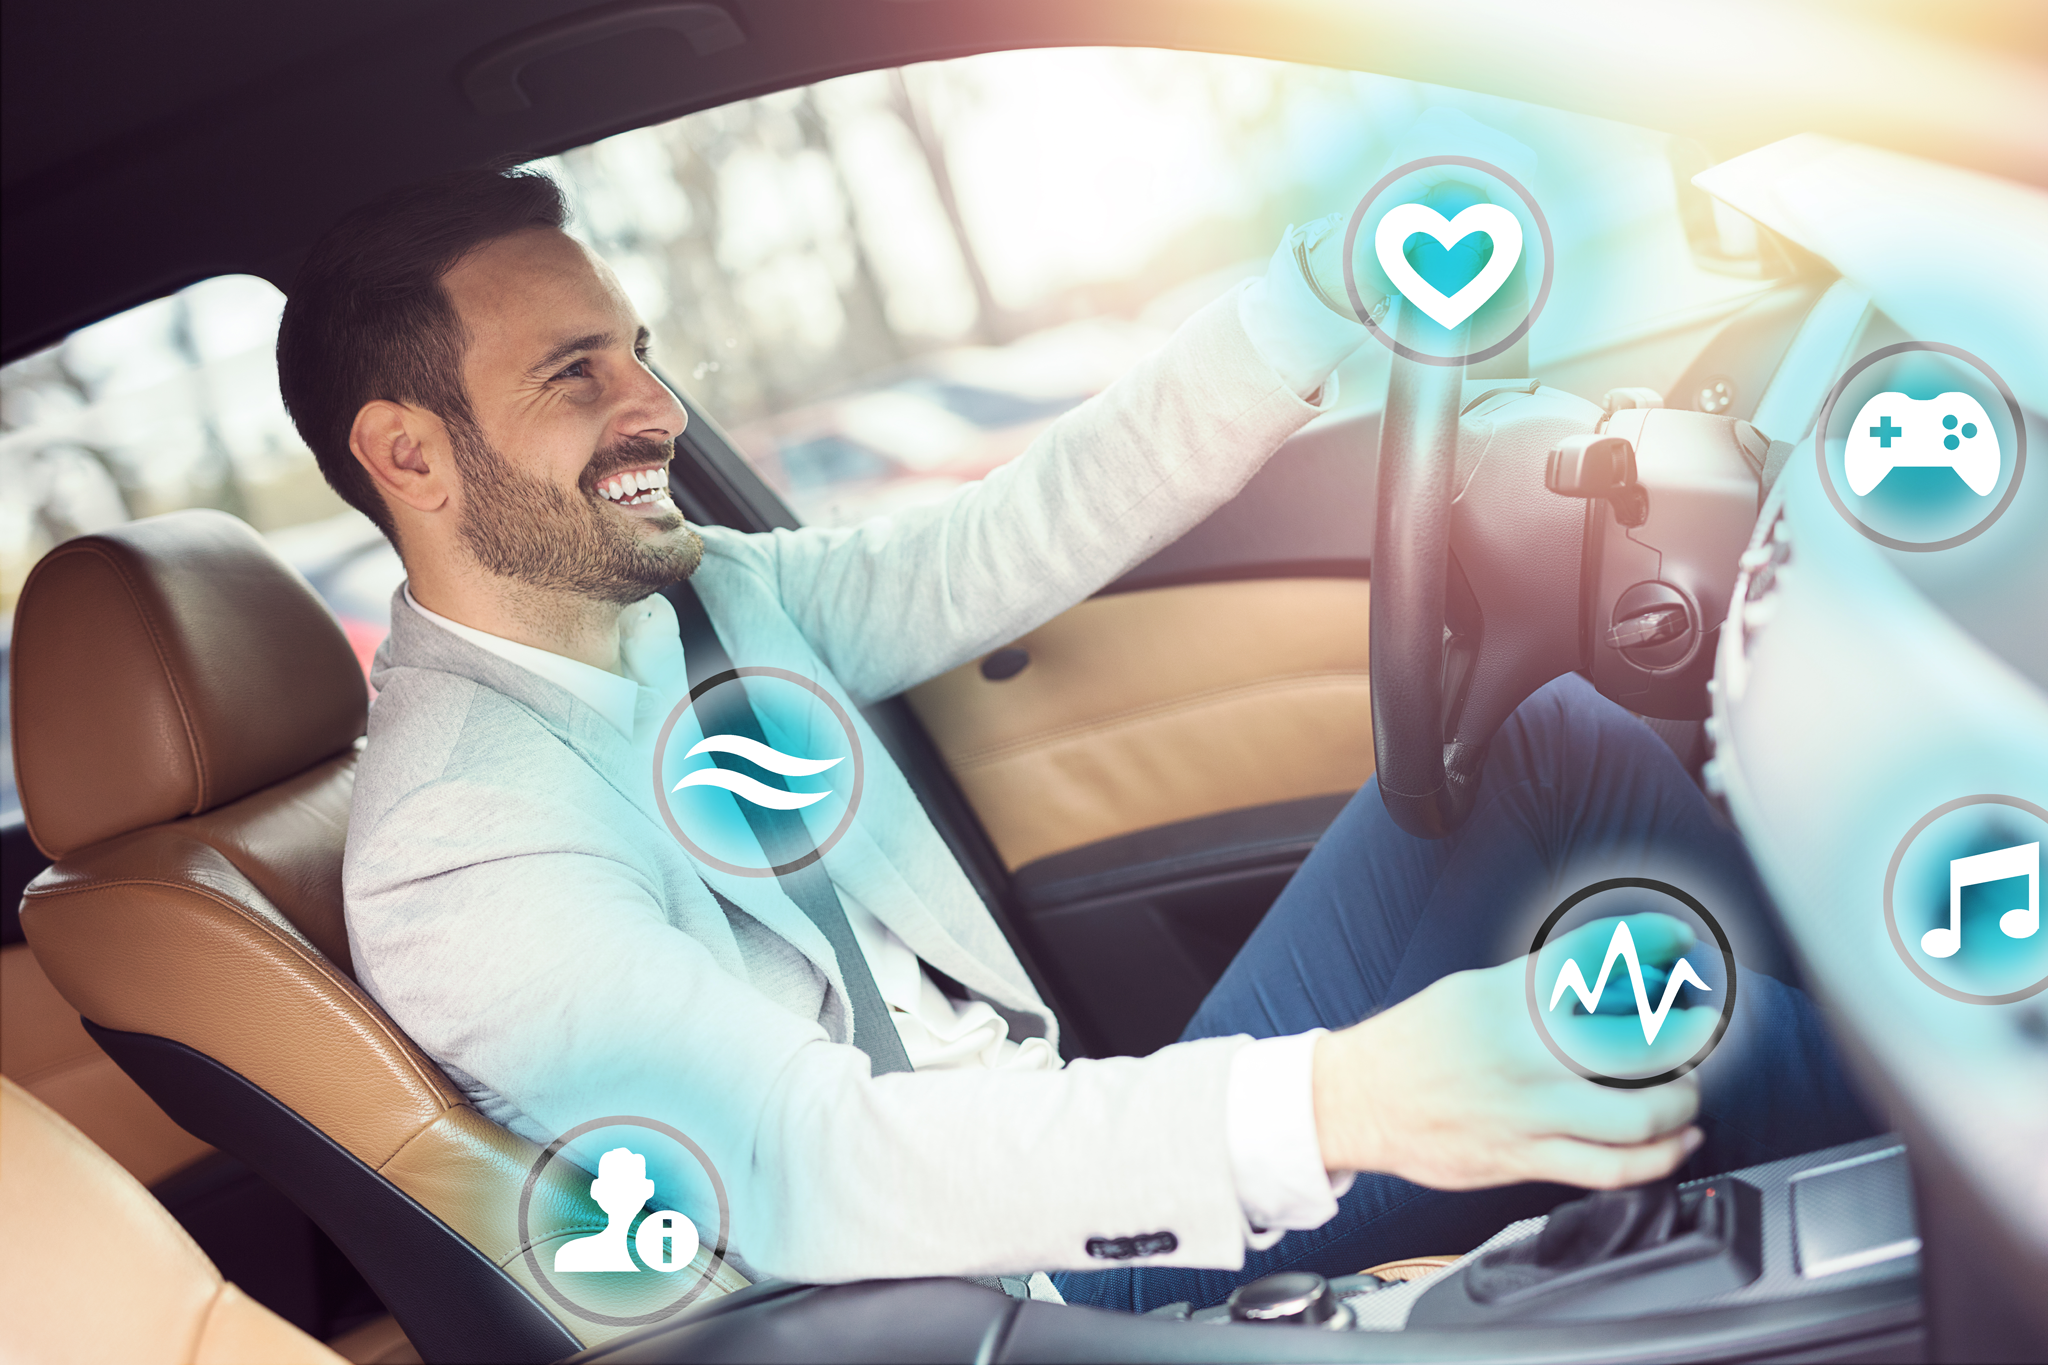 SHORE Drive – driver assistance systems